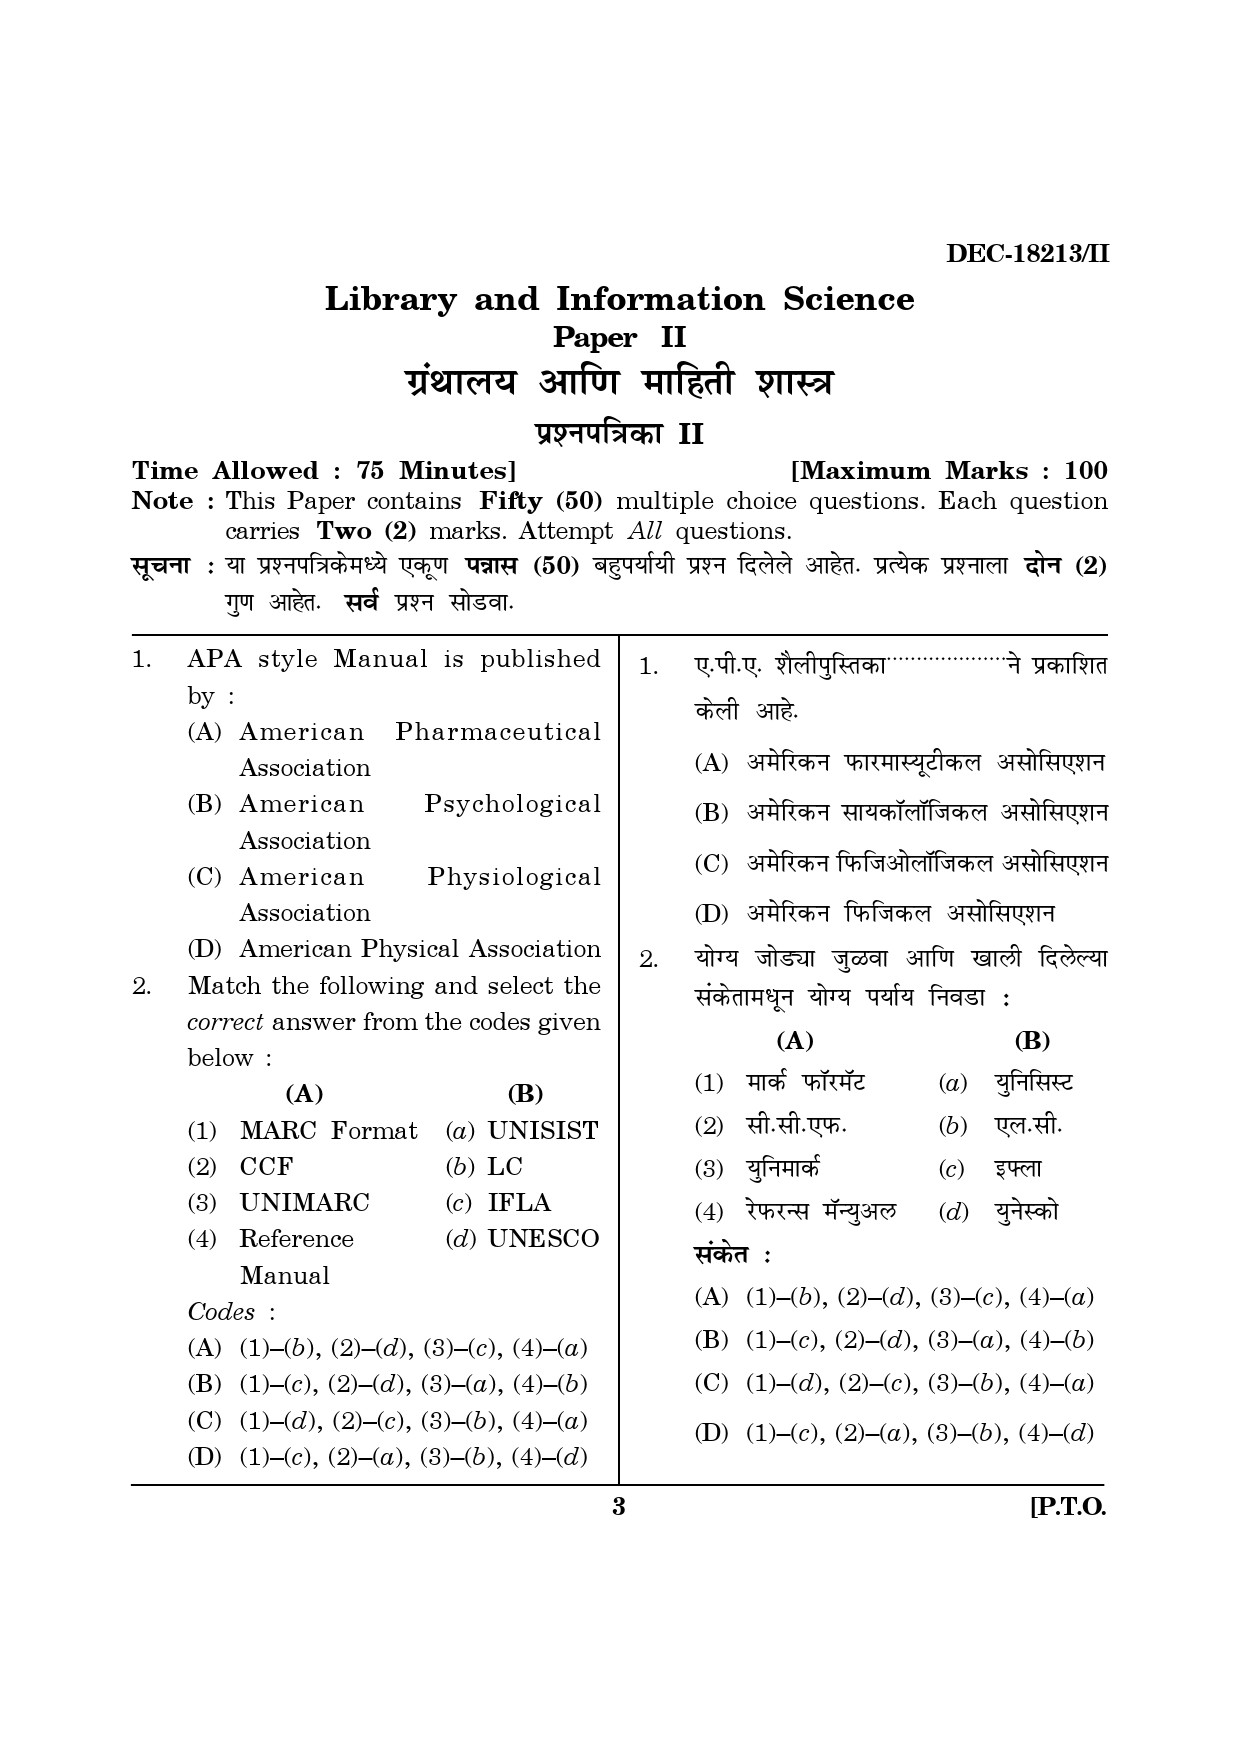 Maharashtra SET Library Information Science Question Paper II December 2013 2